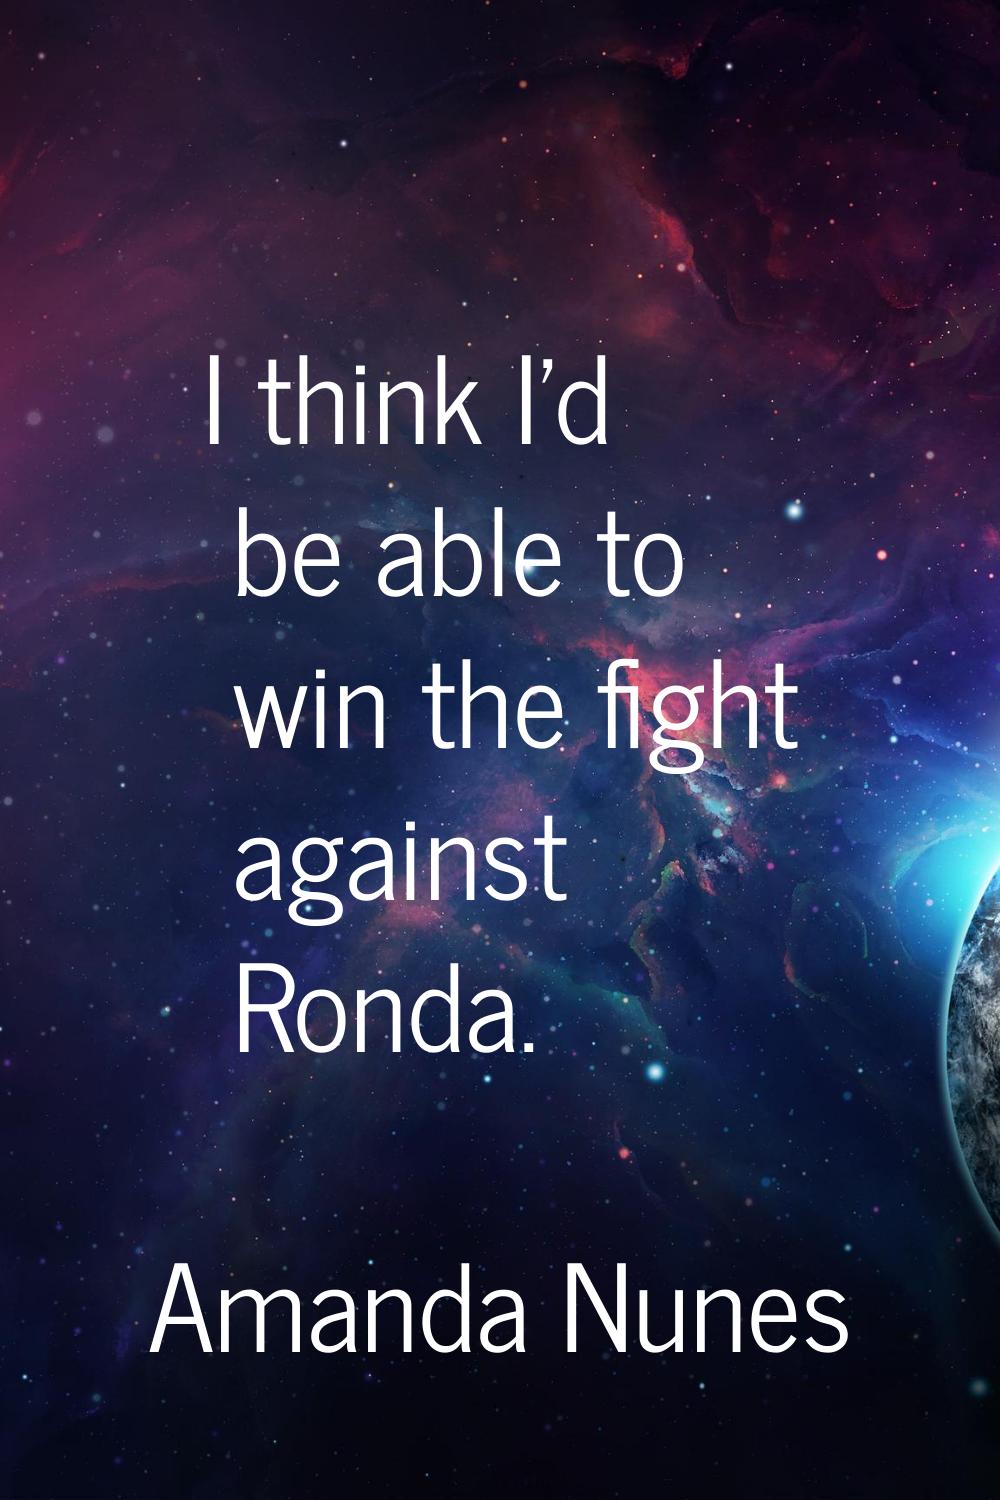 I think I'd be able to win the fight against Ronda.